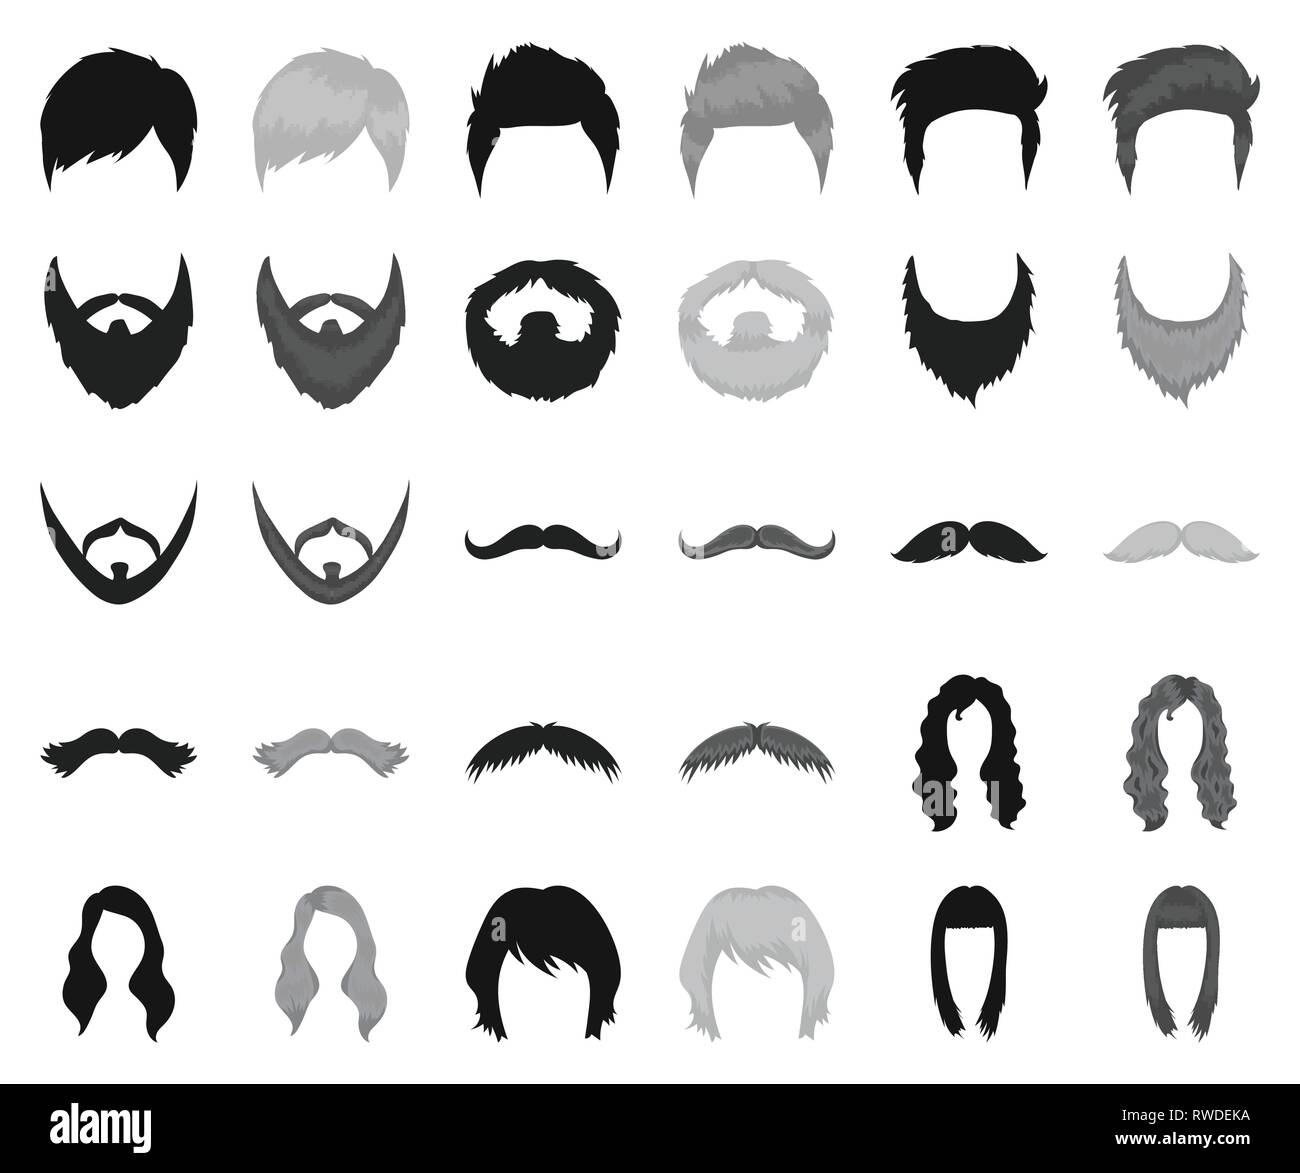 art,beard,black,monochrome,blond,blonde,brown,care,collection,curl,design,fashion, female,hair,haircut,hairdresser,hairstyle ,icon,illustration,image,isolated,logo,man,model ,mustache,red,scythe,set,shave,sign,style,symbol,tail,type,variety,vector,web  ...